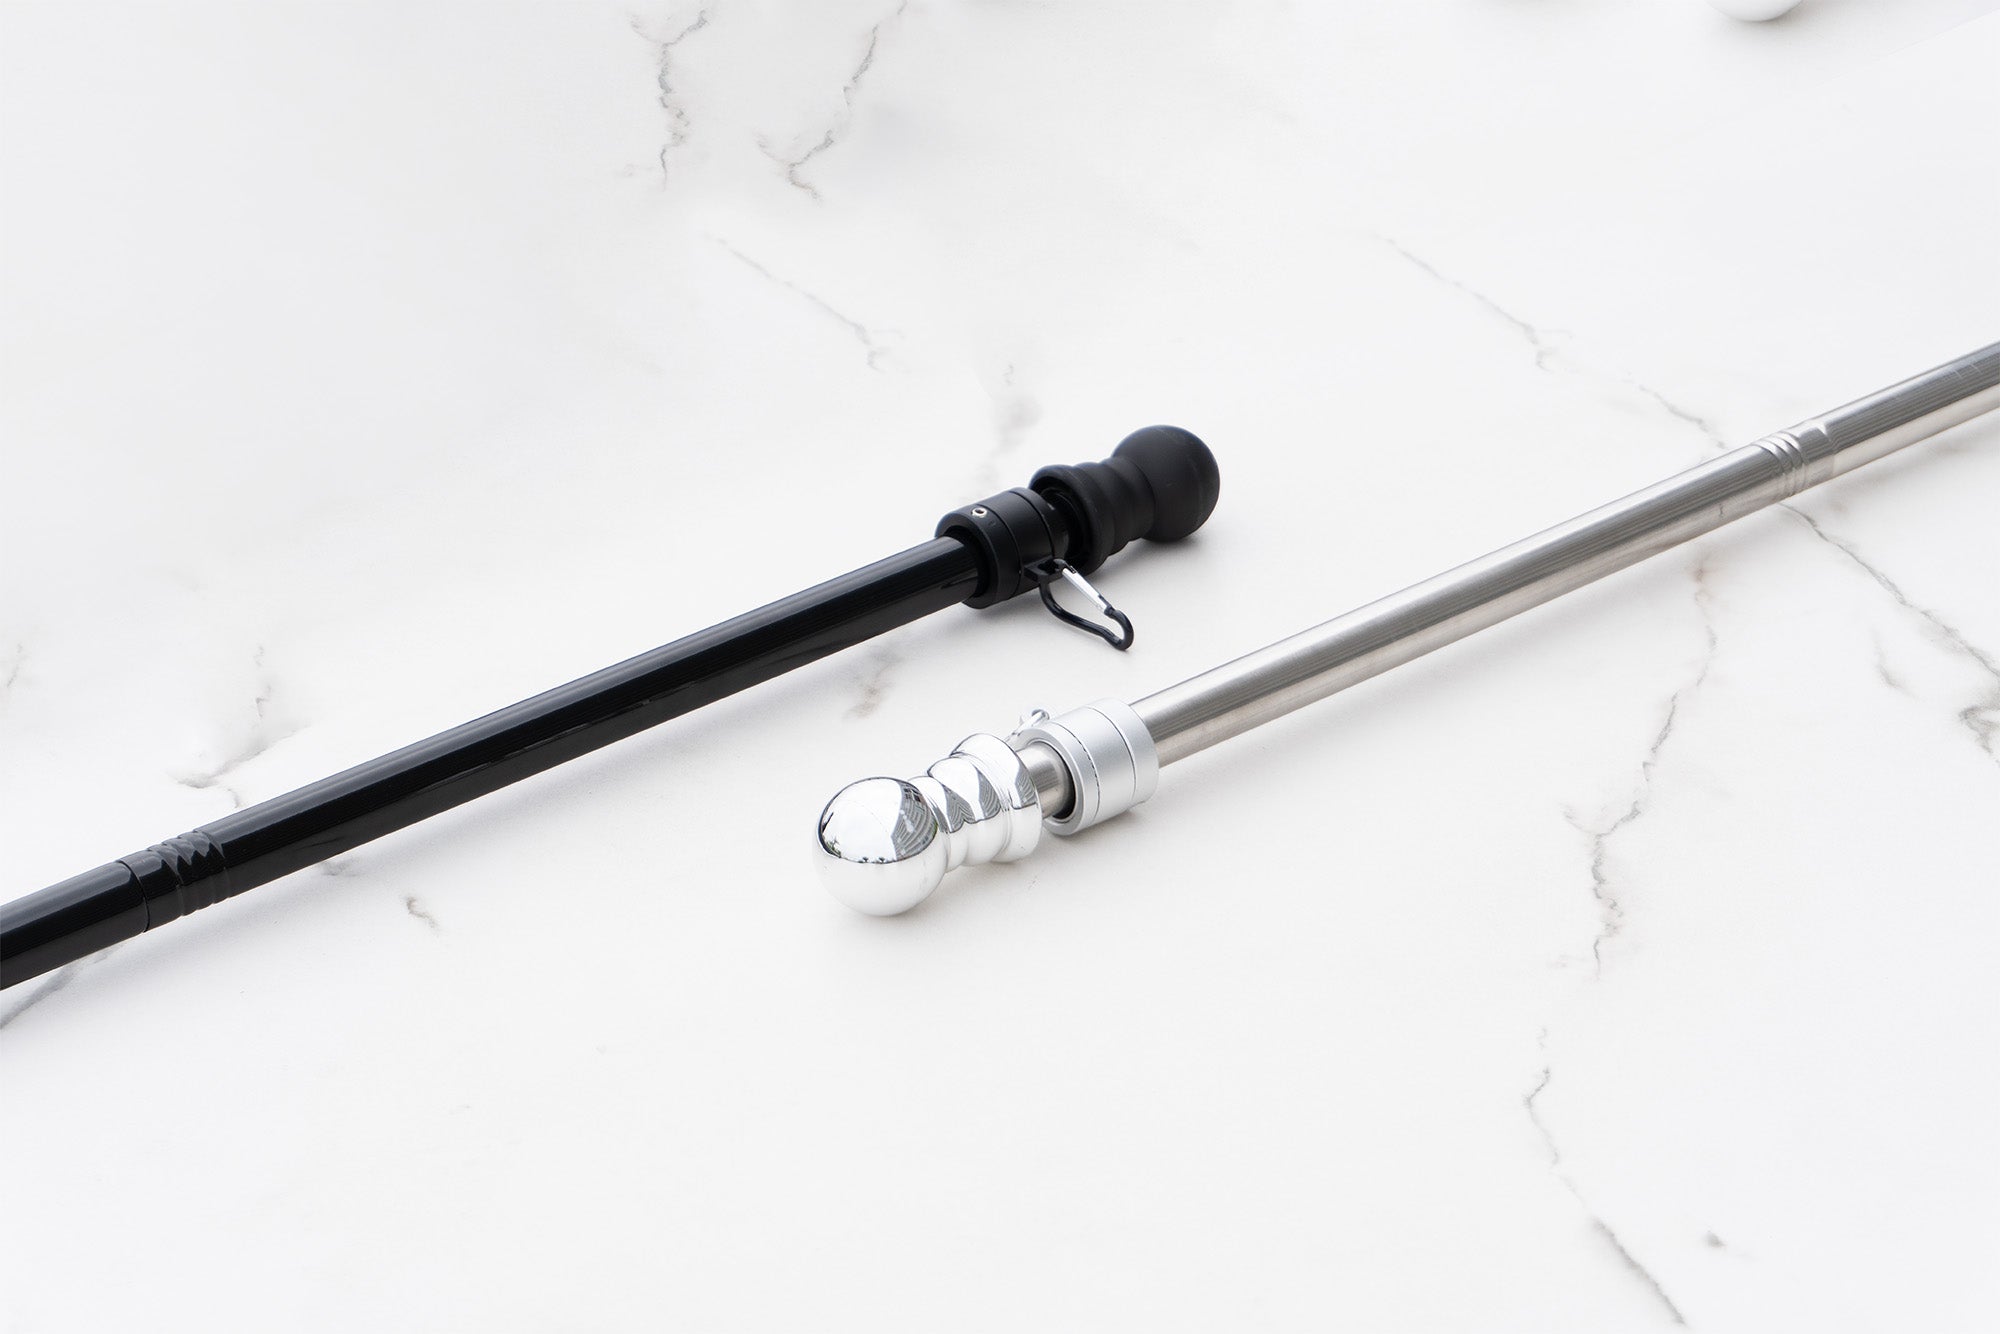 Two curtain rods on a white marble surface: a black rod with a cylindrical end and a silver rod with a spherical, ridged end, both expertly crafted by the manufacturer.